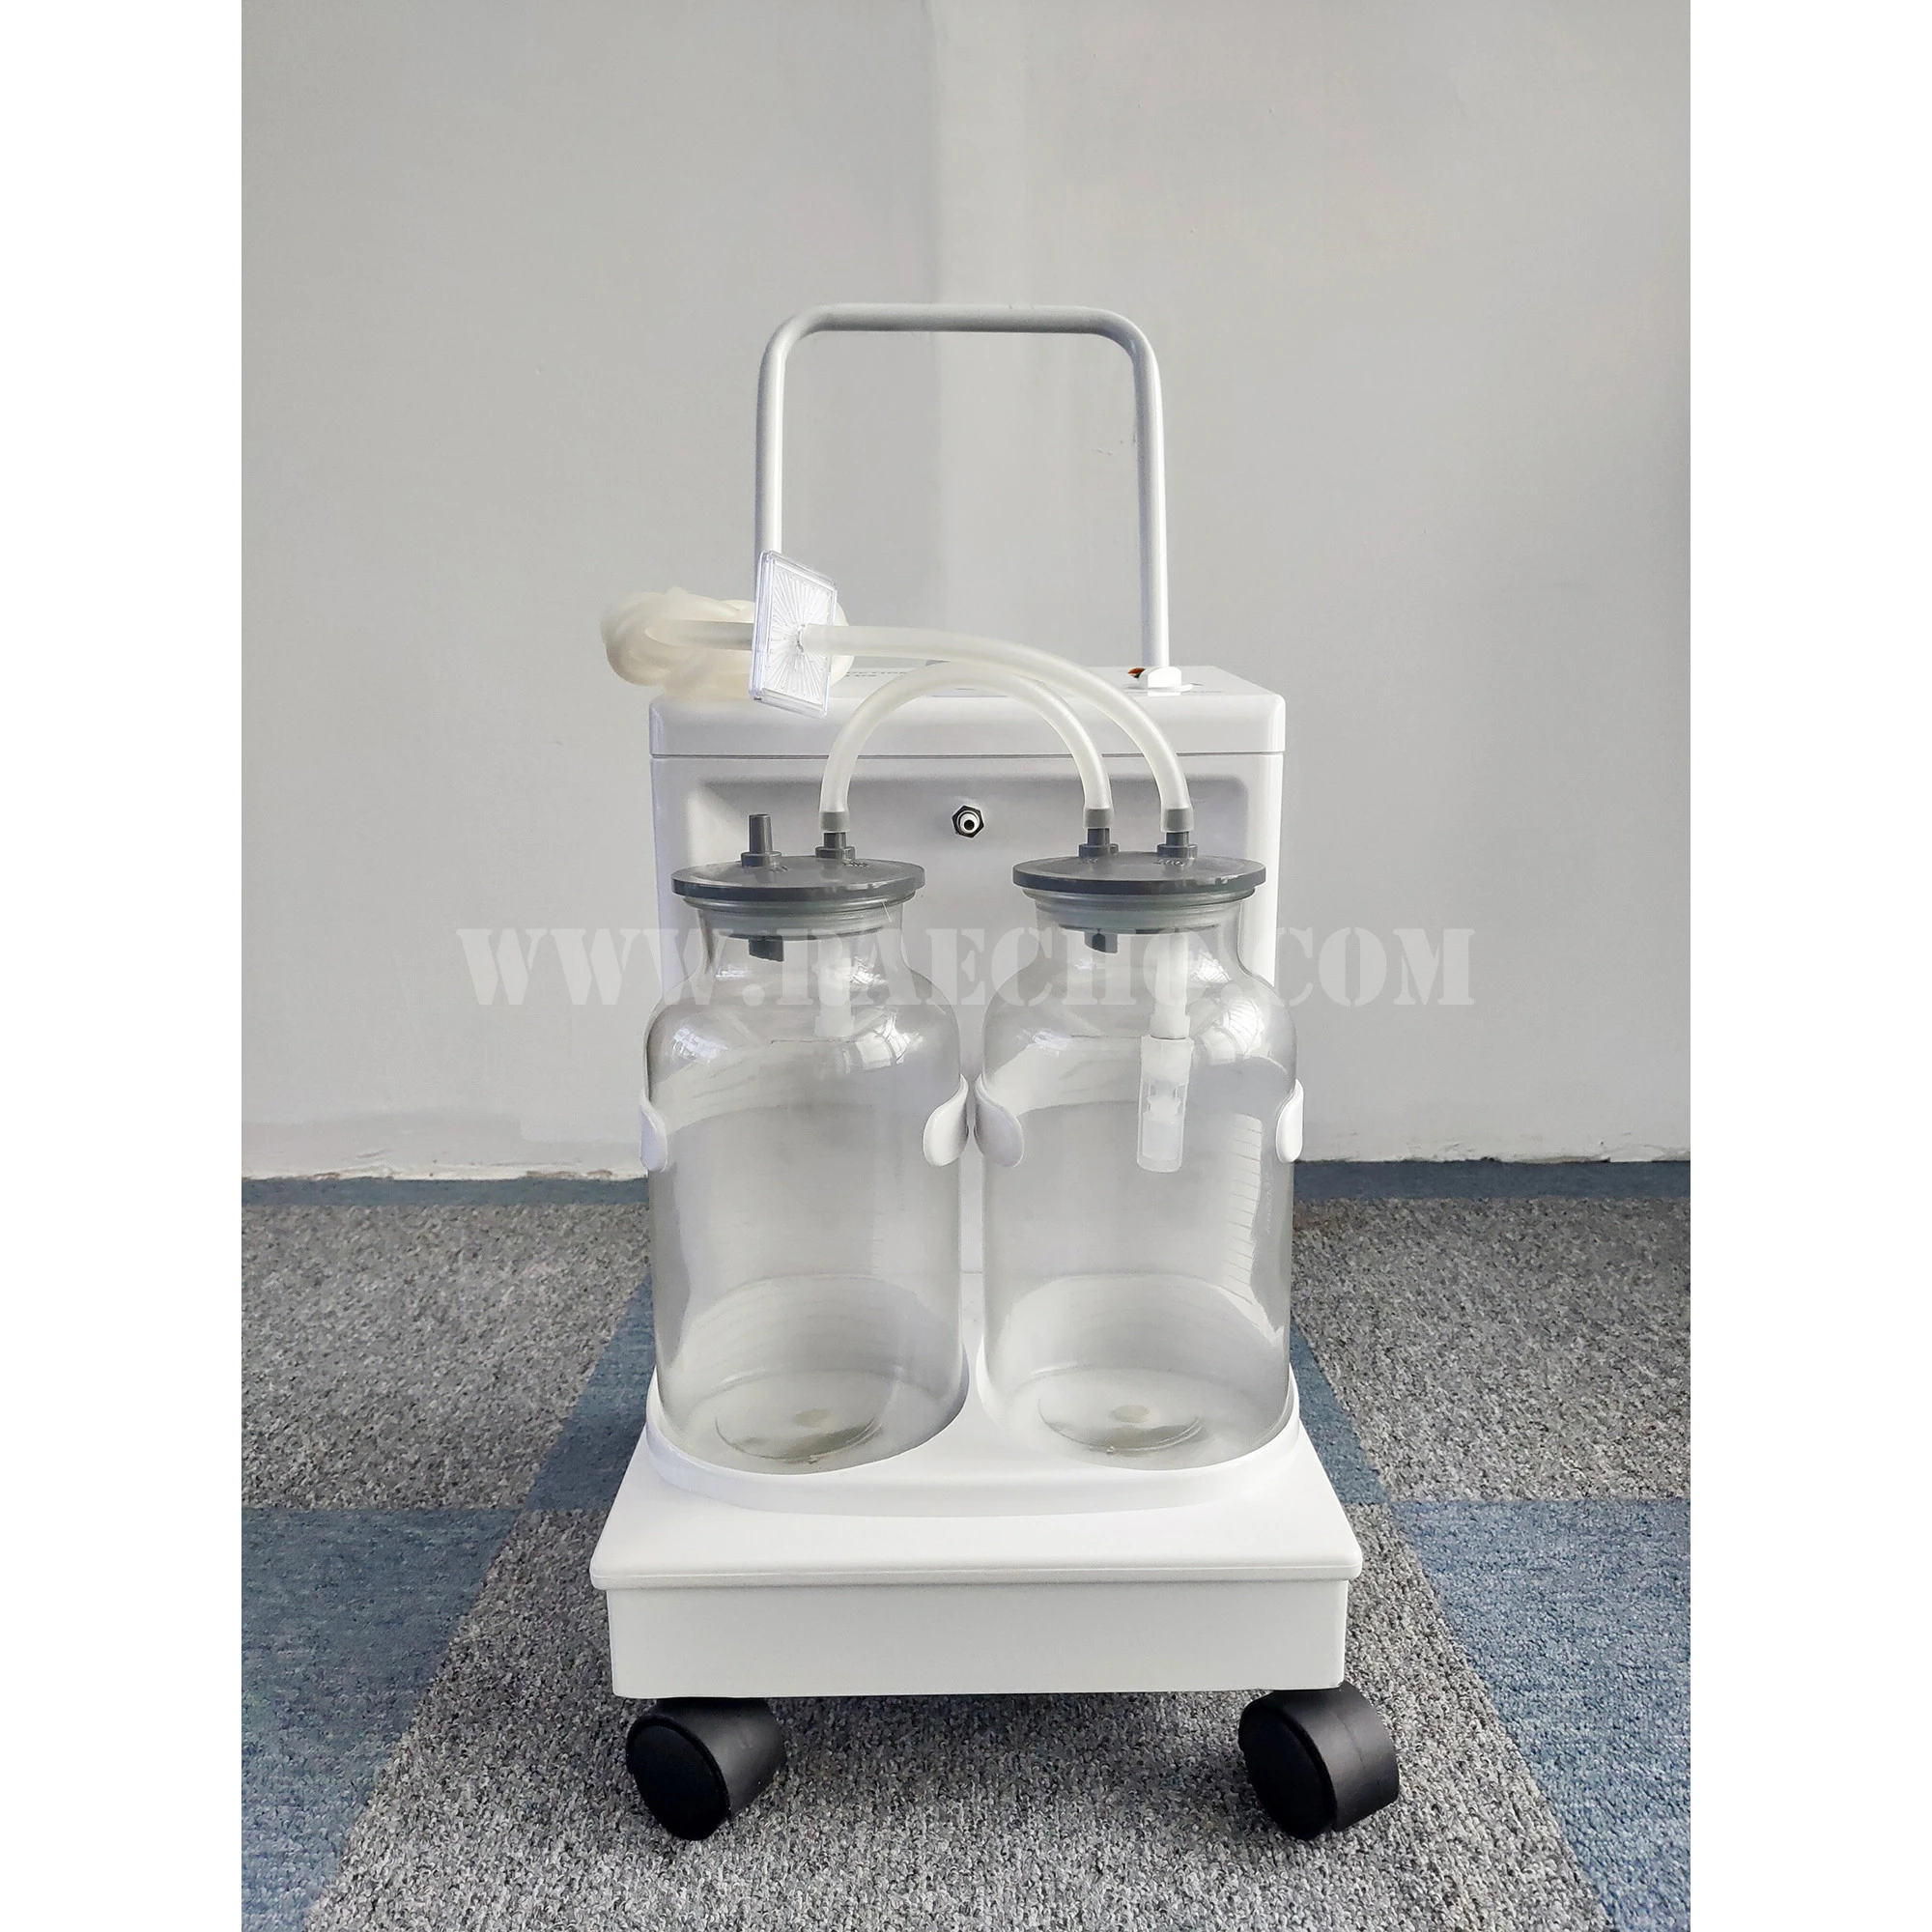 Electric Suction Machine Surgical Vacuum Aspirator Portable Suction Apparatus for Surgery